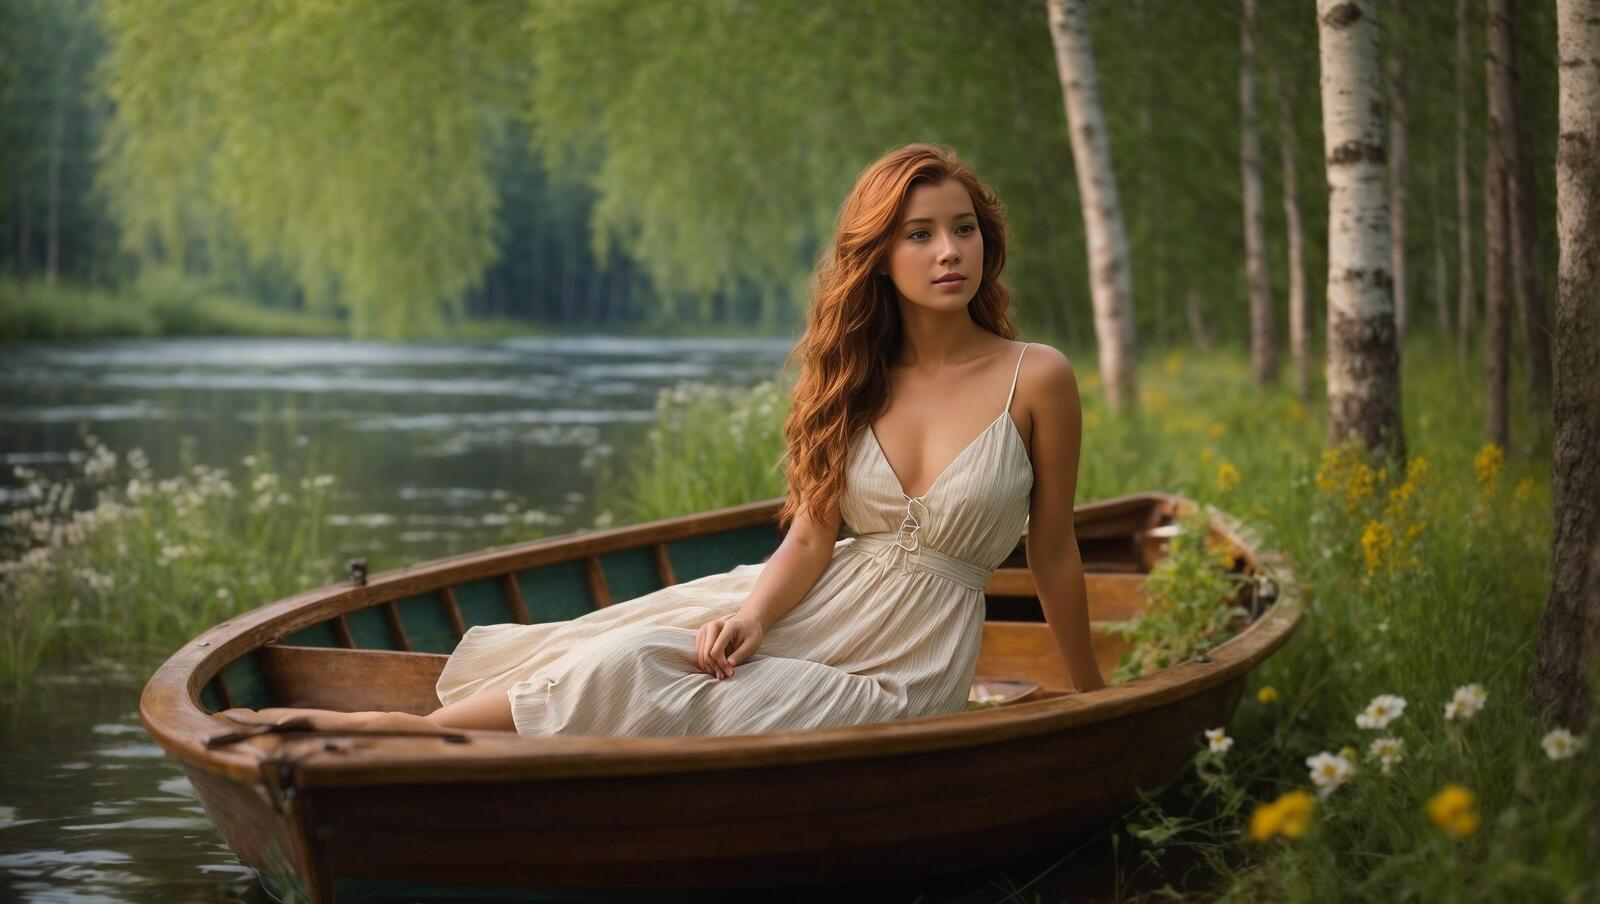 Free photo A woman is sitting in a boat that is in the water